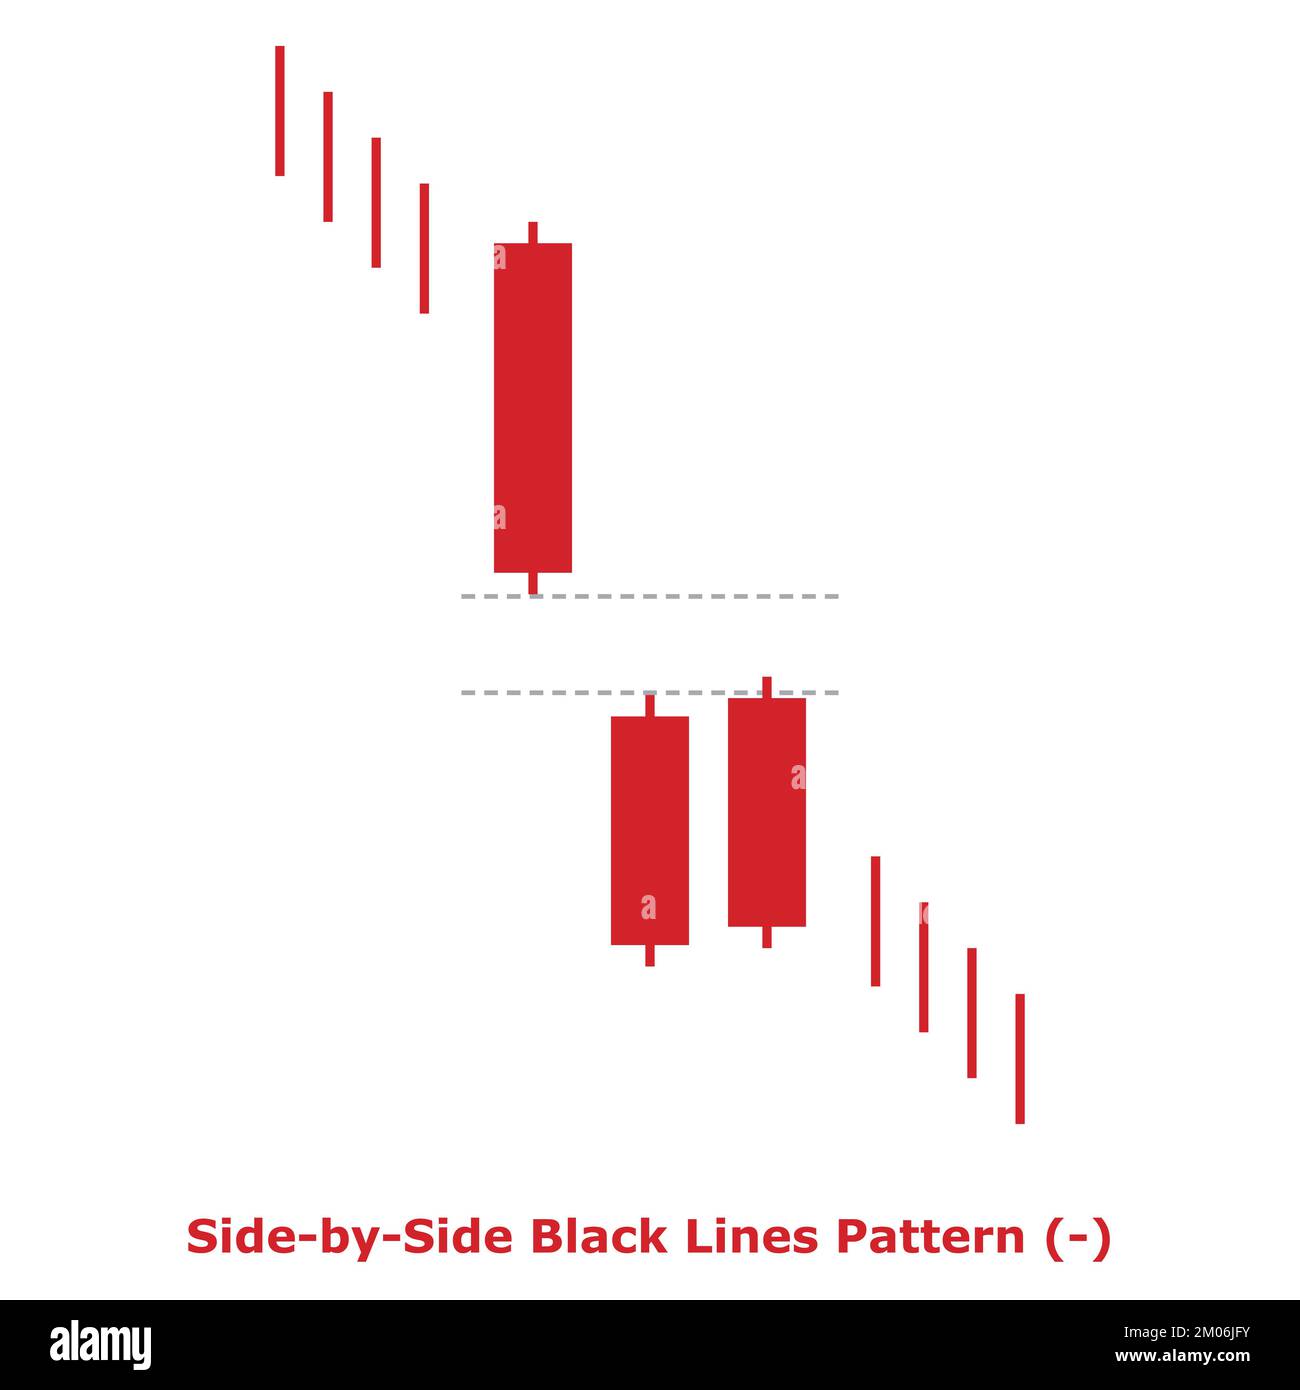 Side-by-Side Black Lines Pattern - Bearish - Green & Red - Square - Bearish Continuation Japanese Candlestick Pattern - Triple Patterns Stock Vector